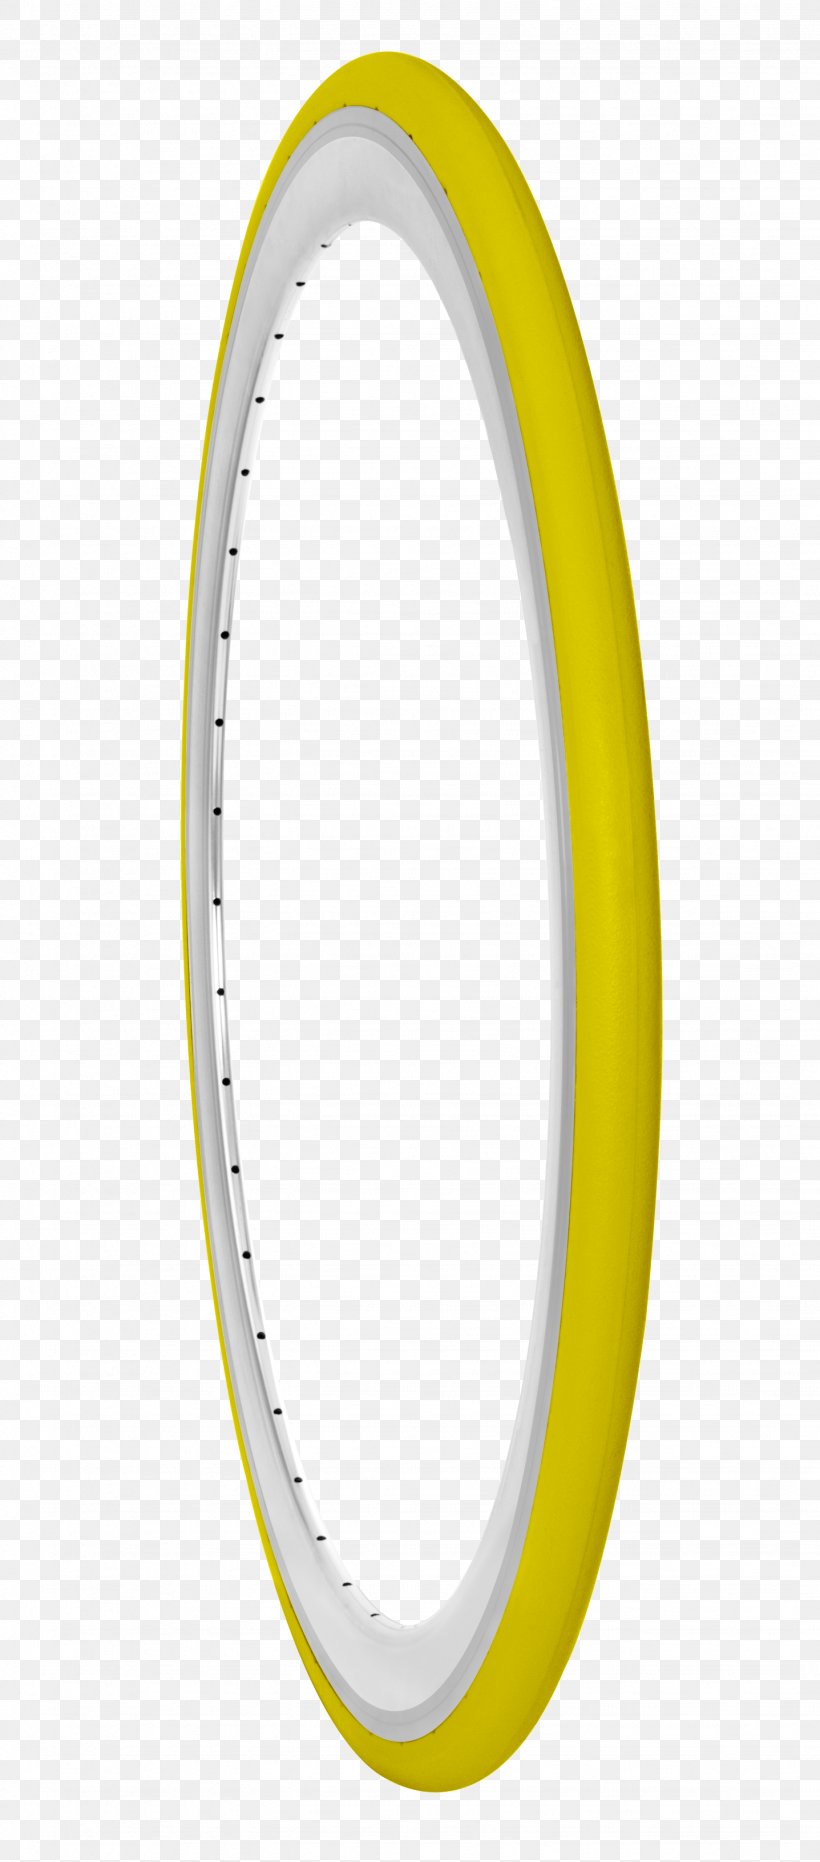 Rim Bicycle Tires Wheel, PNG, 1437x3264px, Rim, Bicycle, Bicycle Tire, Bicycle Tires, Oval Download Free